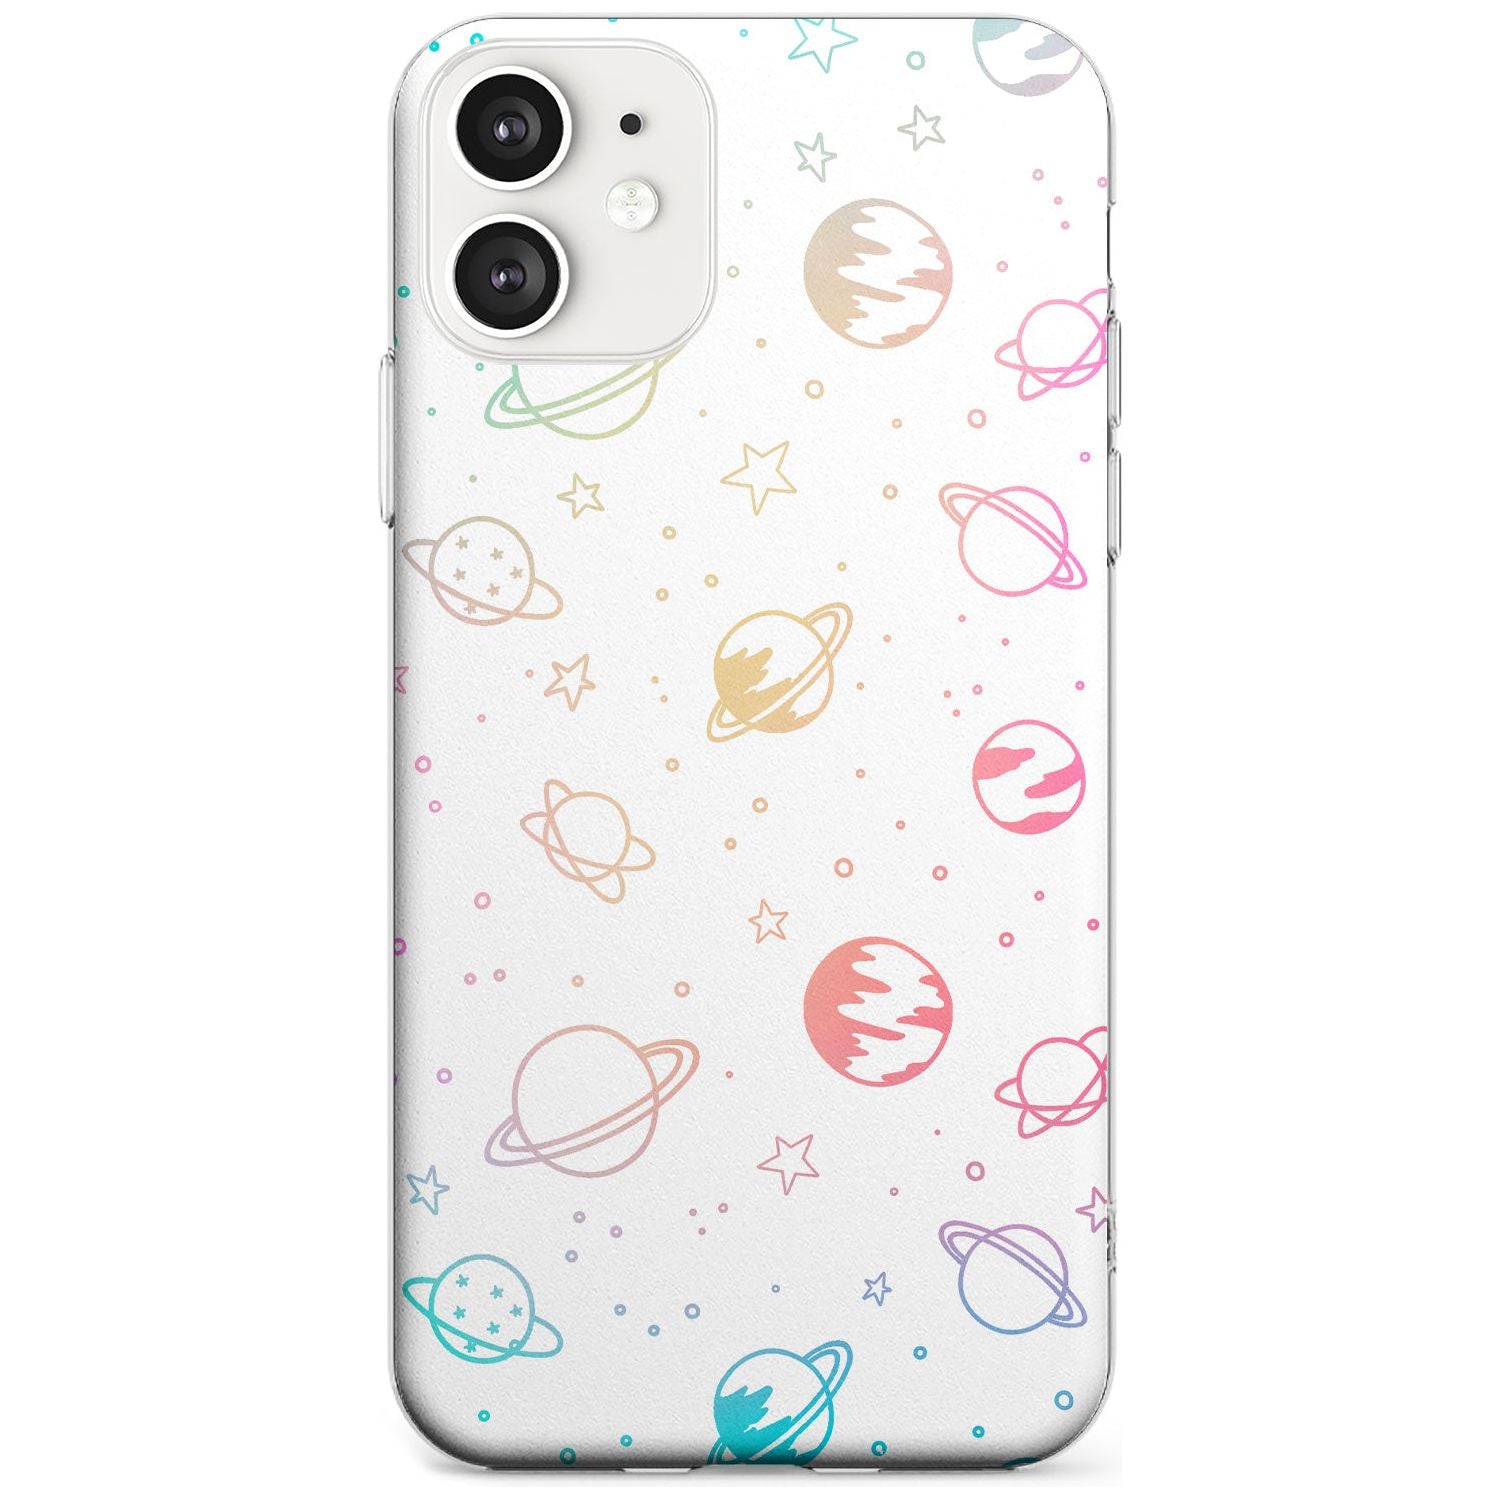 Outer Space Outlines: Pastels on White Black Impact Phone Case for iPhone 11